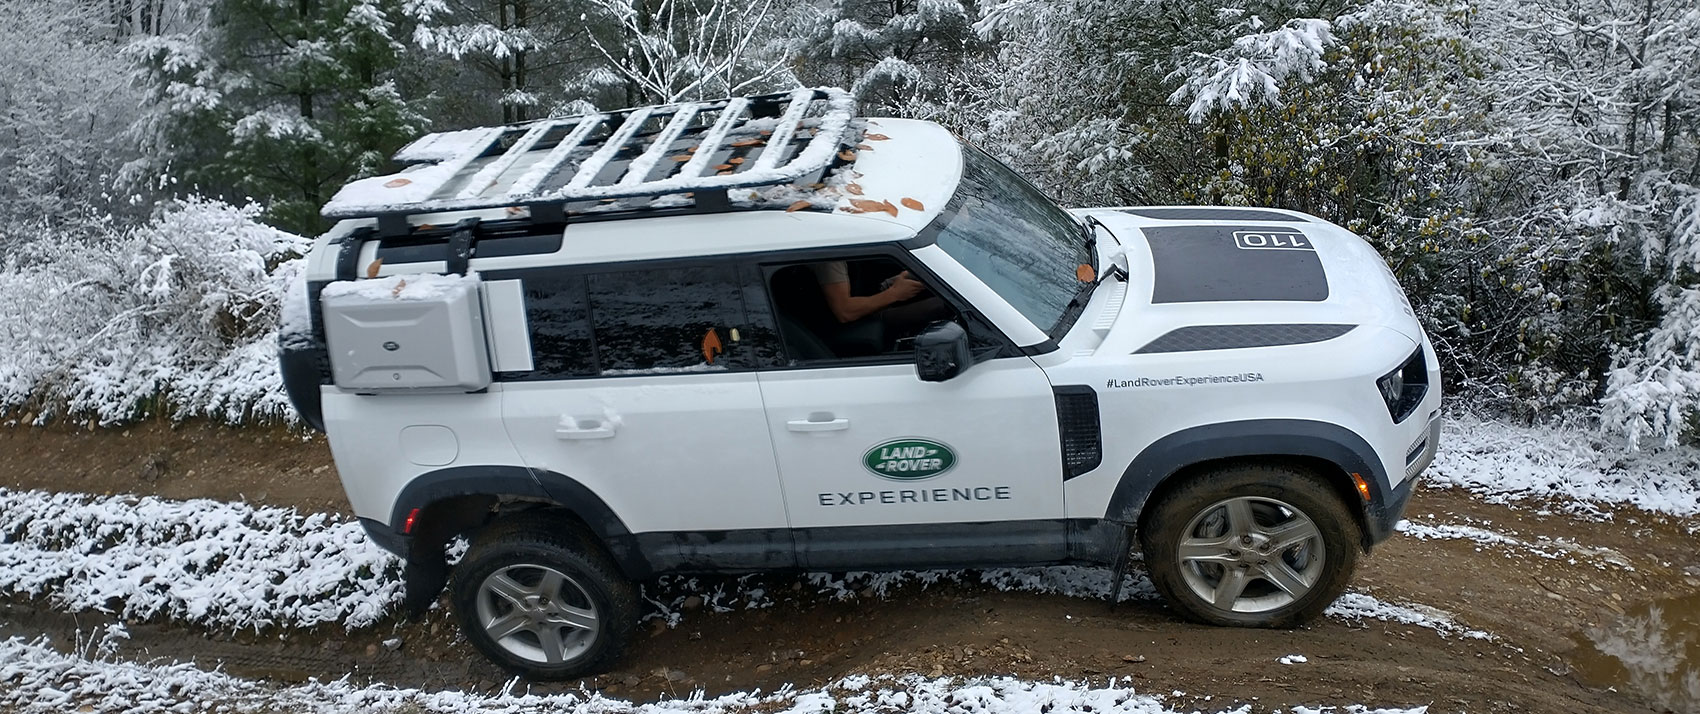 Land Rover Defender on a muddy, snowy trail